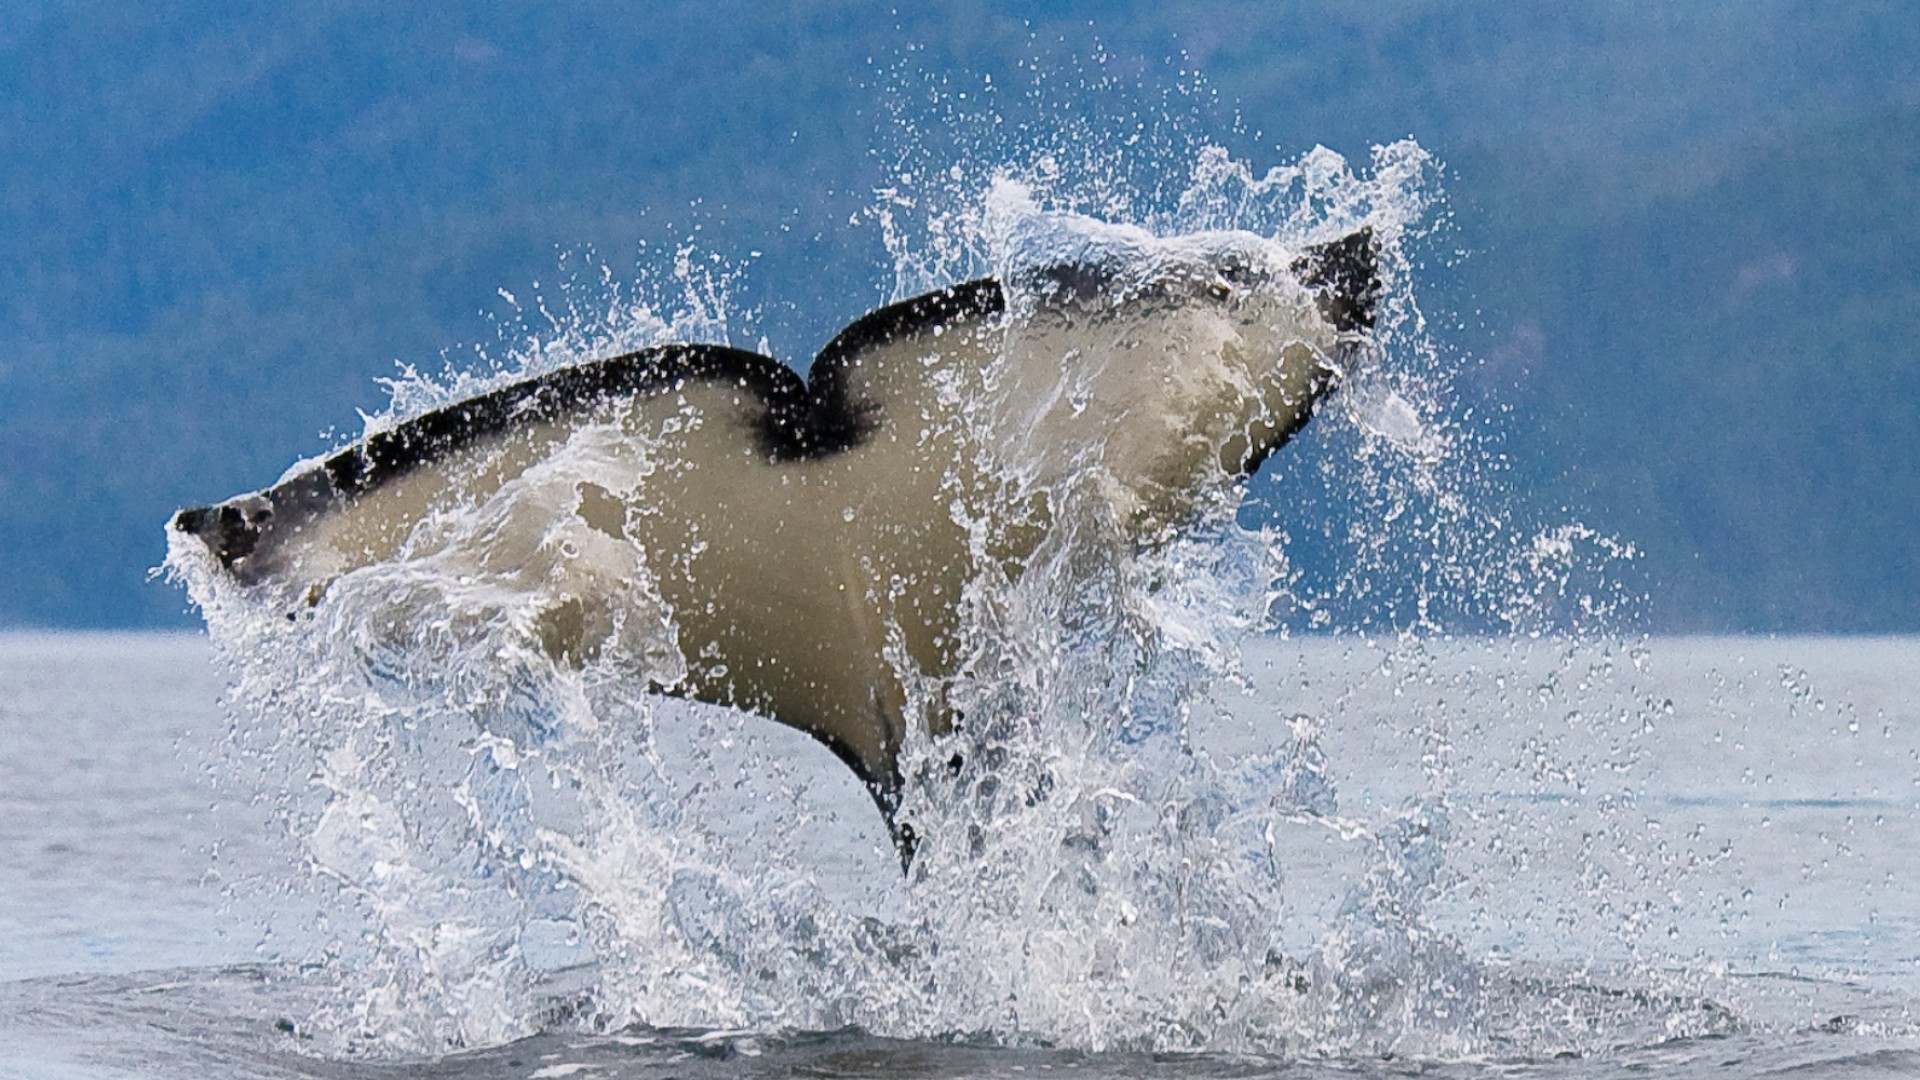 Orca whale tail slapping the water creating a big spash